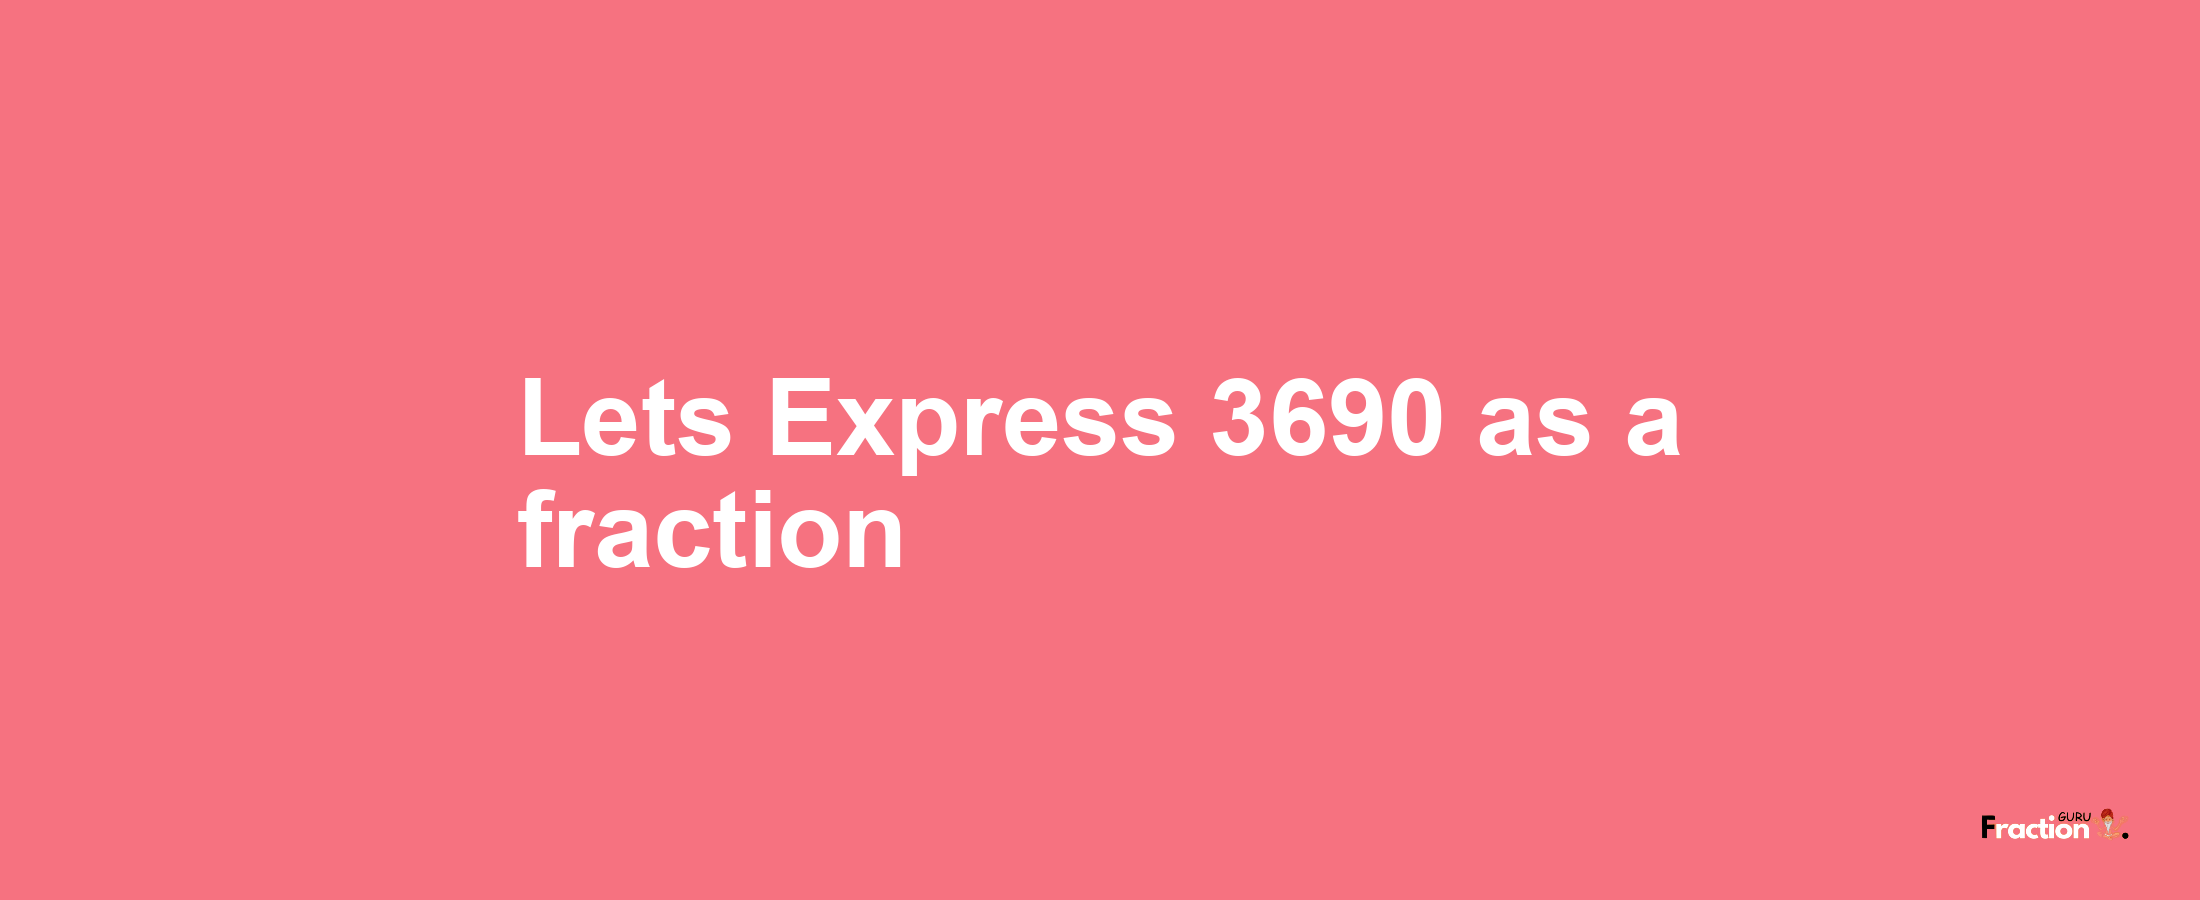 Lets Express 3690 as afraction